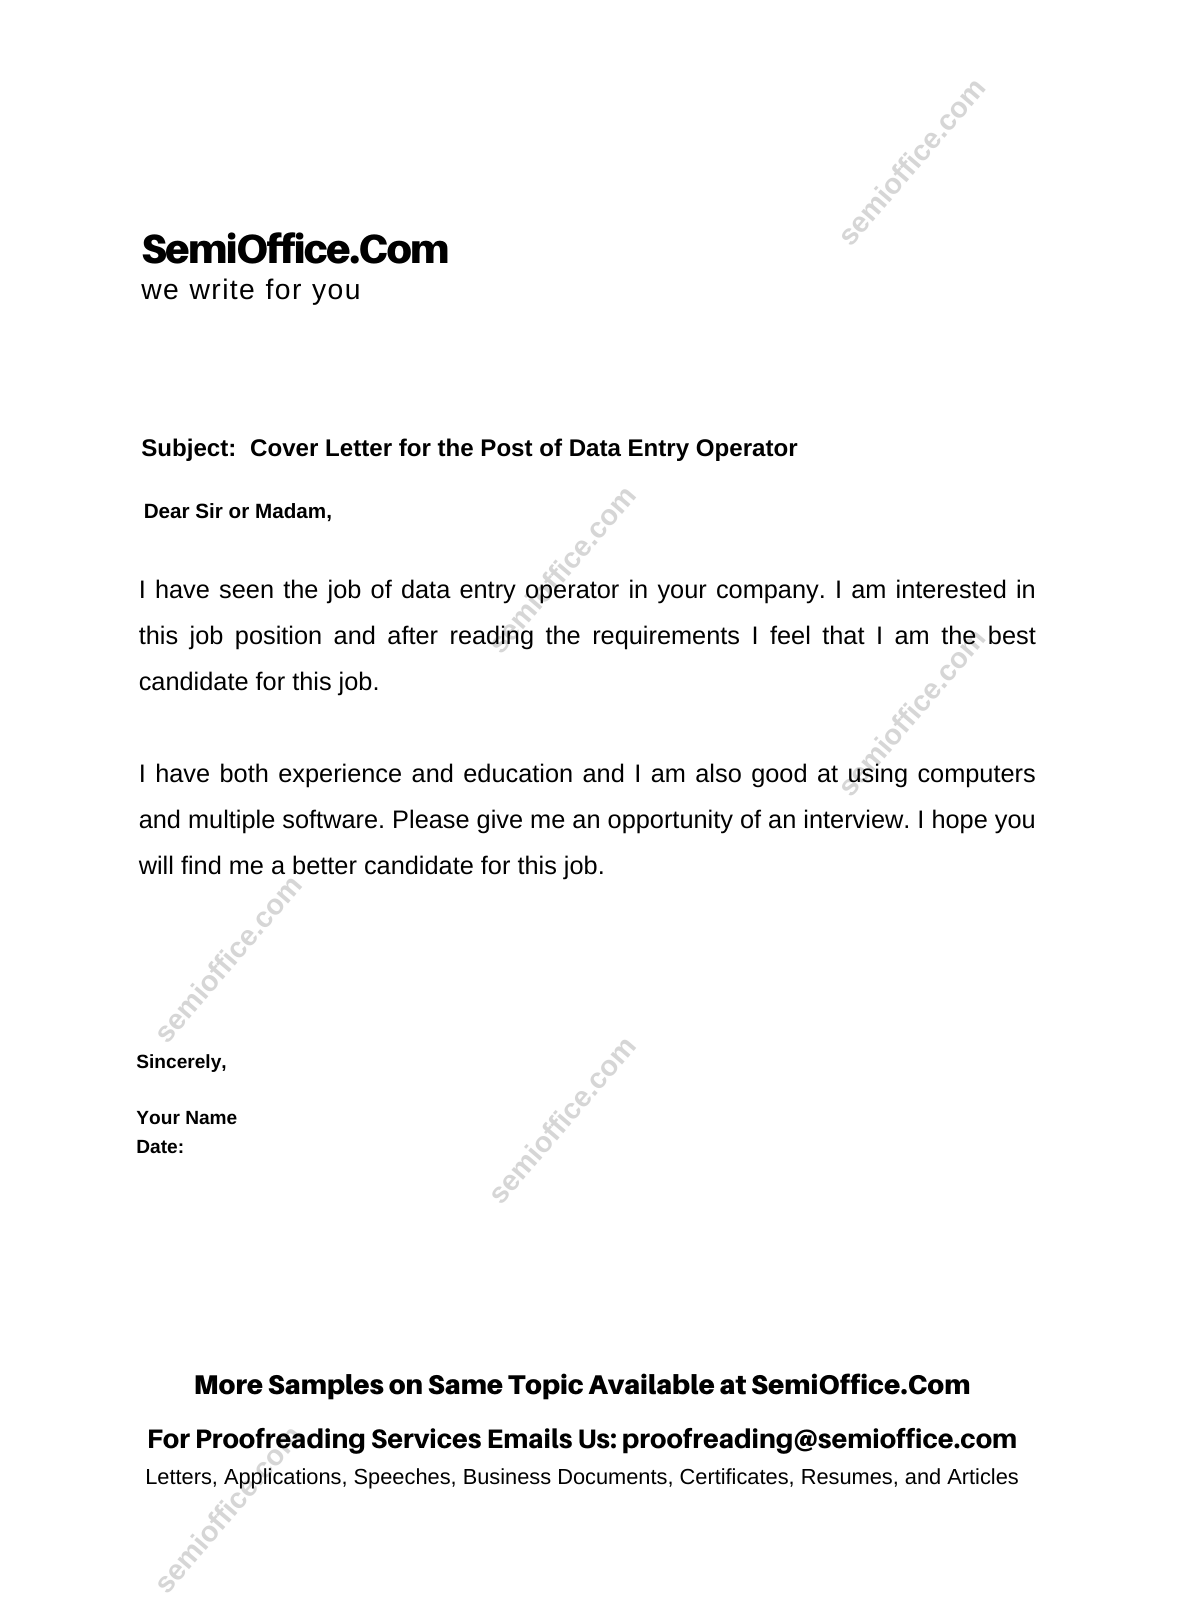 cover letter for data entry operator without experience